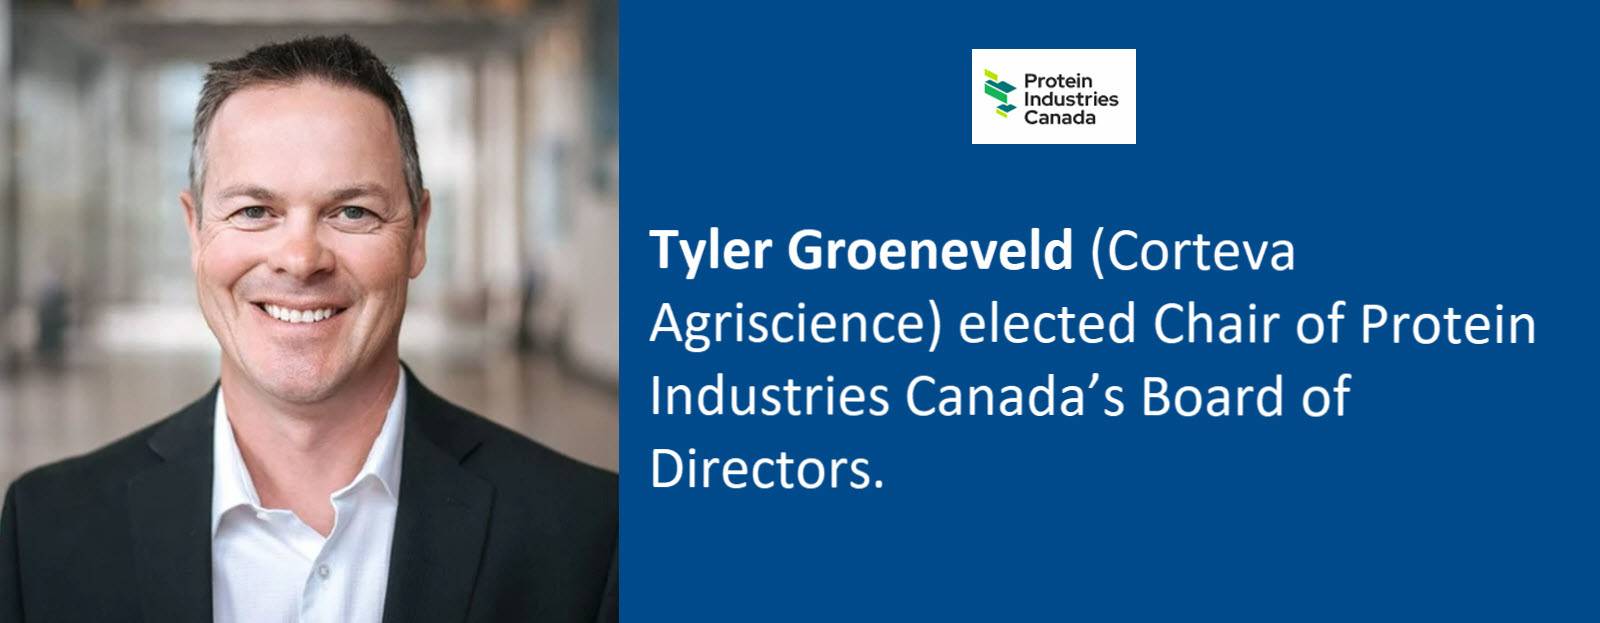 Protein Industries Canada elects Tyler Groeneveld as new Board Chair